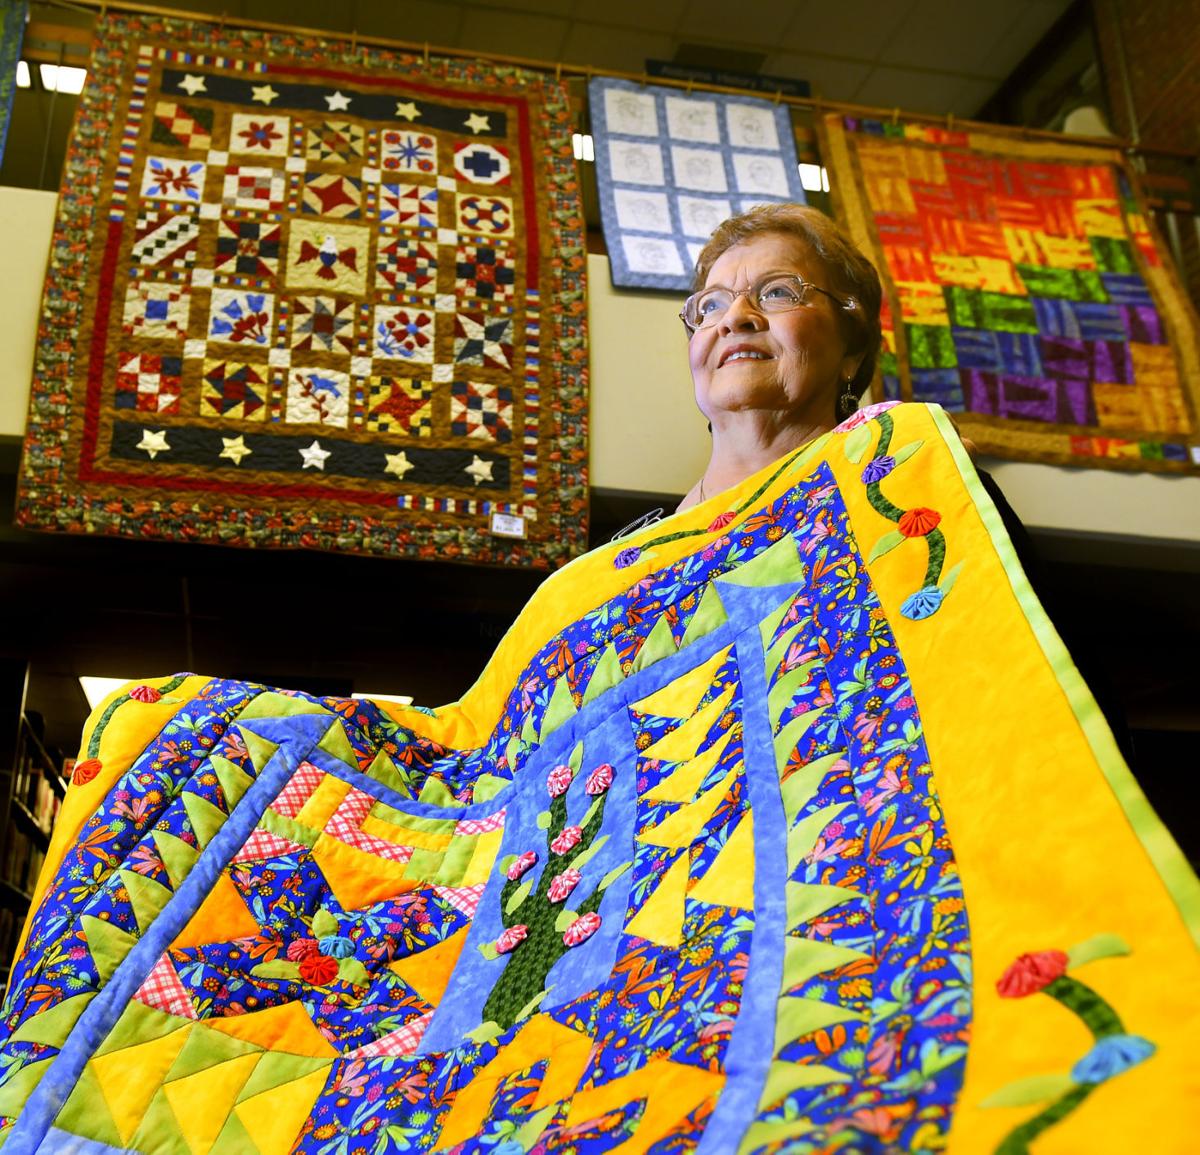 One Woman Quilt Show | Gallery | decaturdaily.com